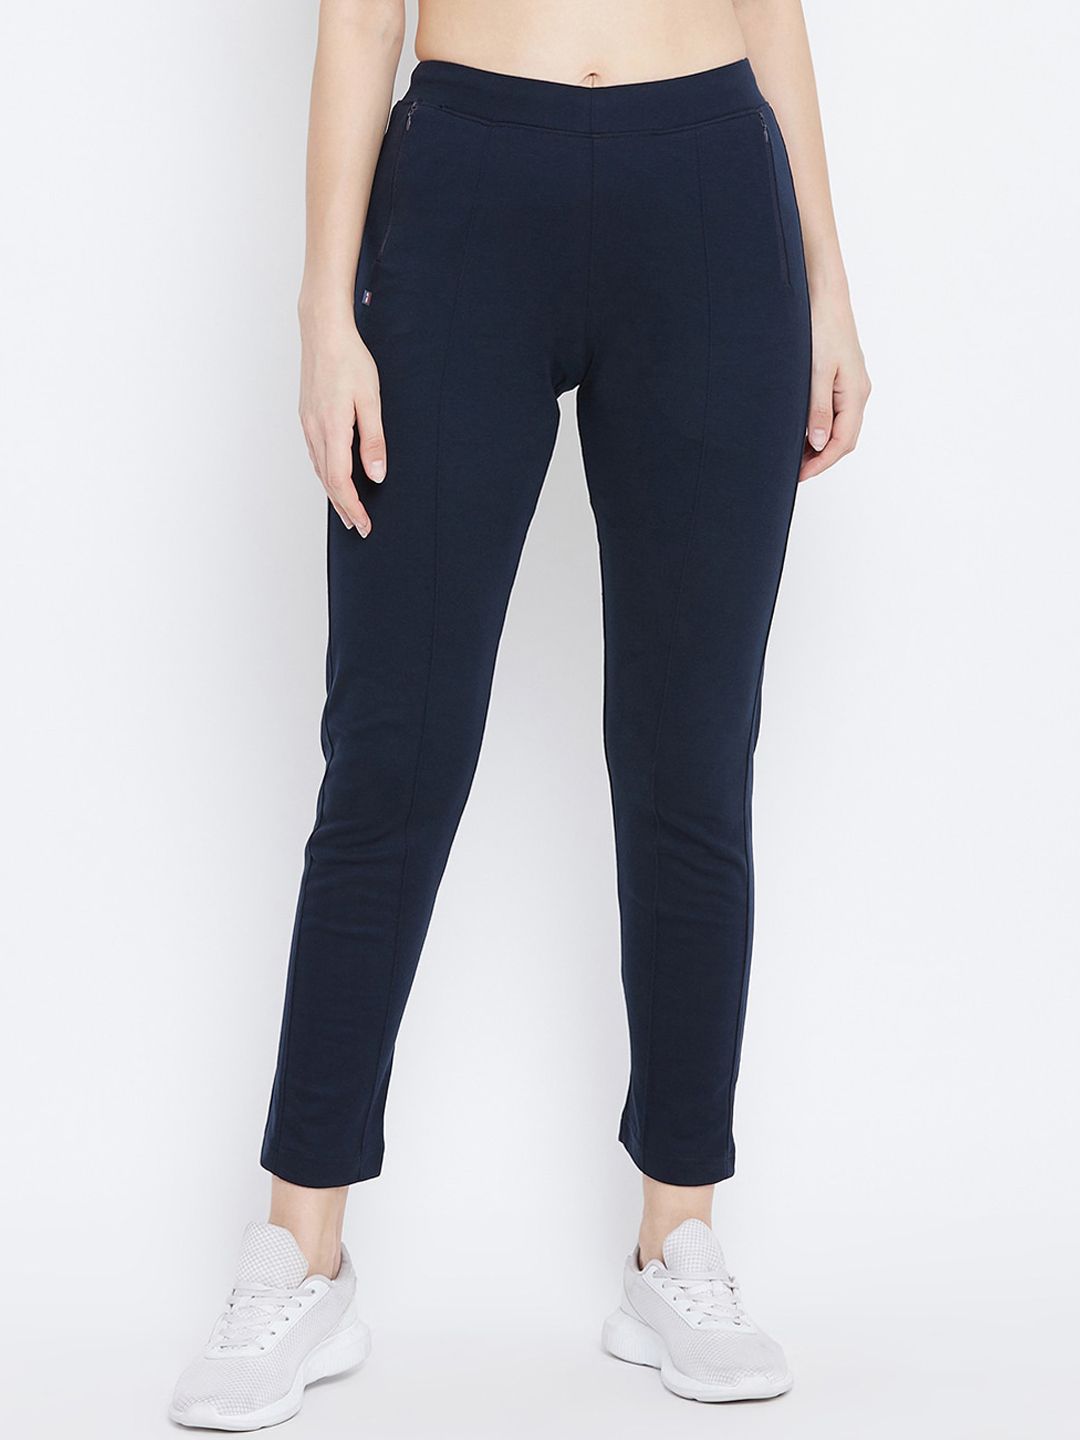 FRENCH FLEXIOUS Women Navy-Blue Solid Track Pants Price in India